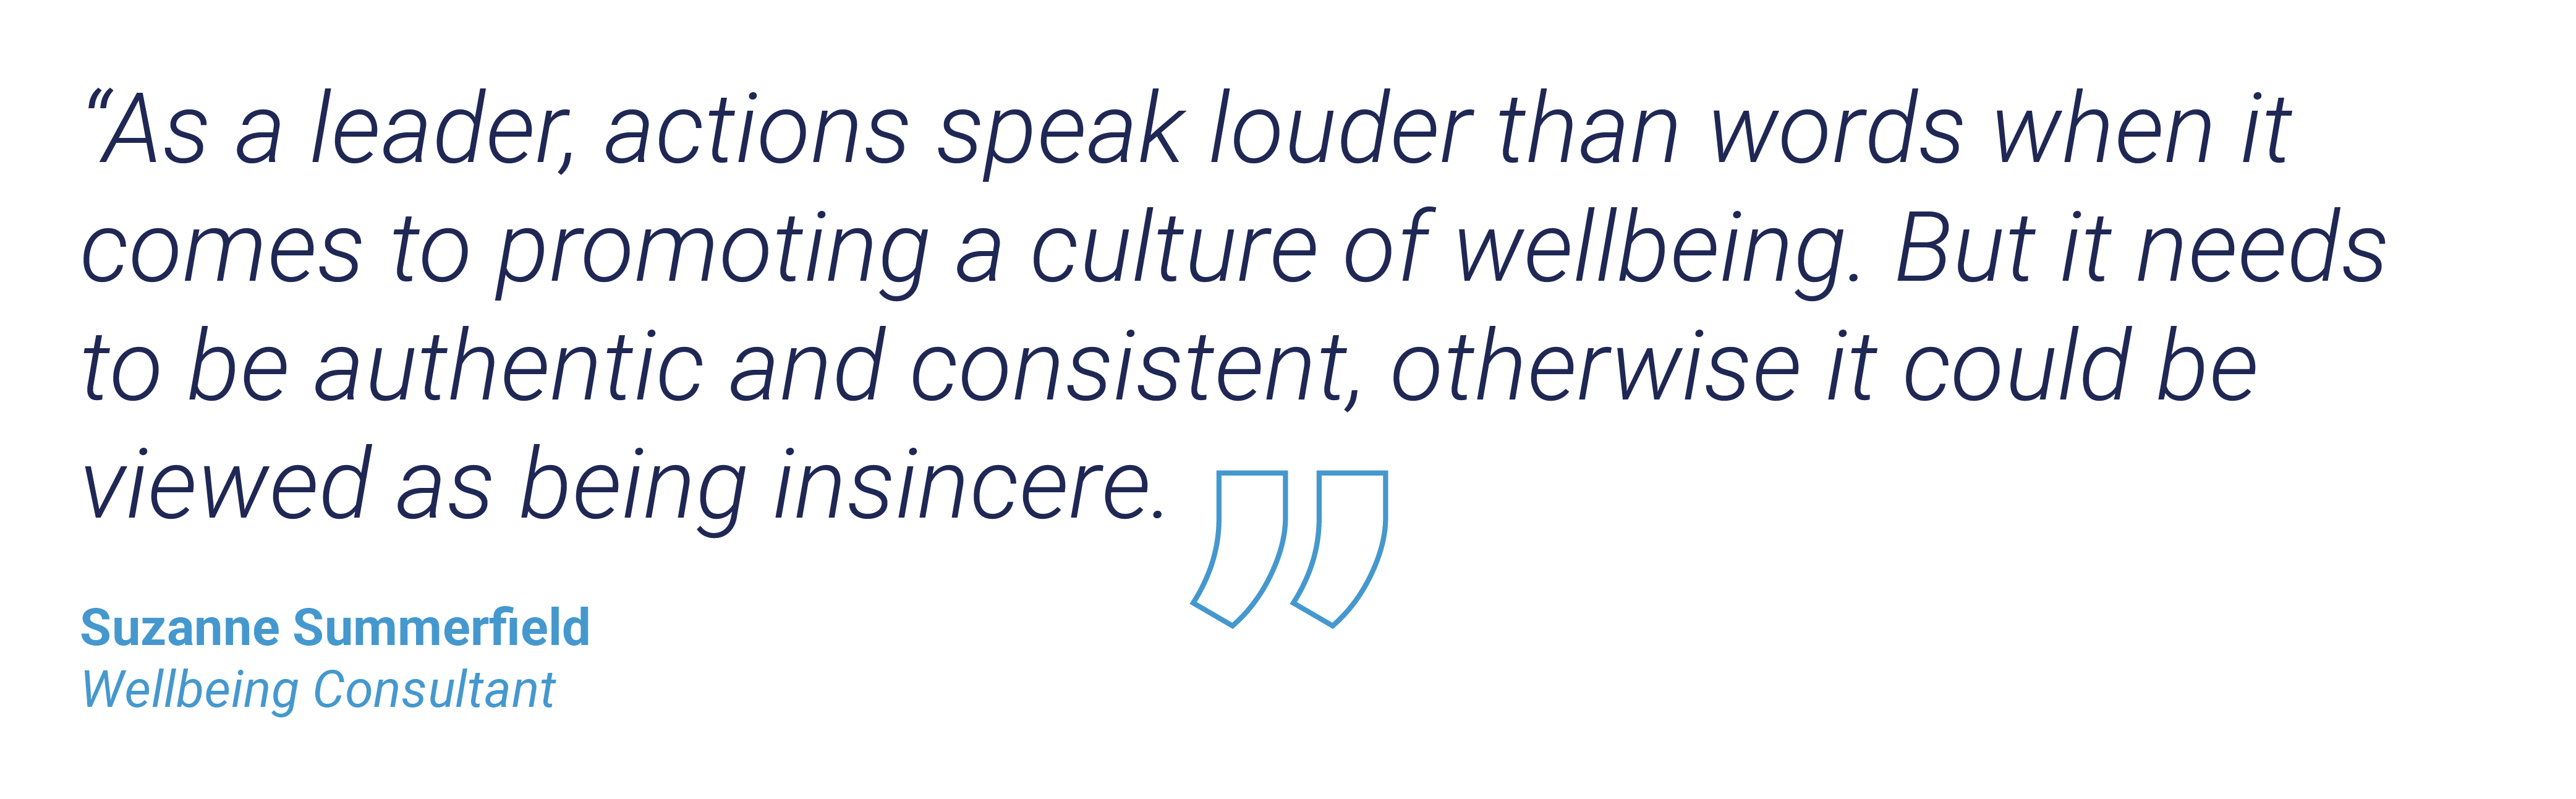 “As a leader, actions speak louder than words when it comes to promoting a culture of wellbeing. But it needs to be authentic and consistent, otherwise it could be viewed as being insincere.” Suzanne Summerfield, Wellbeing Consultant